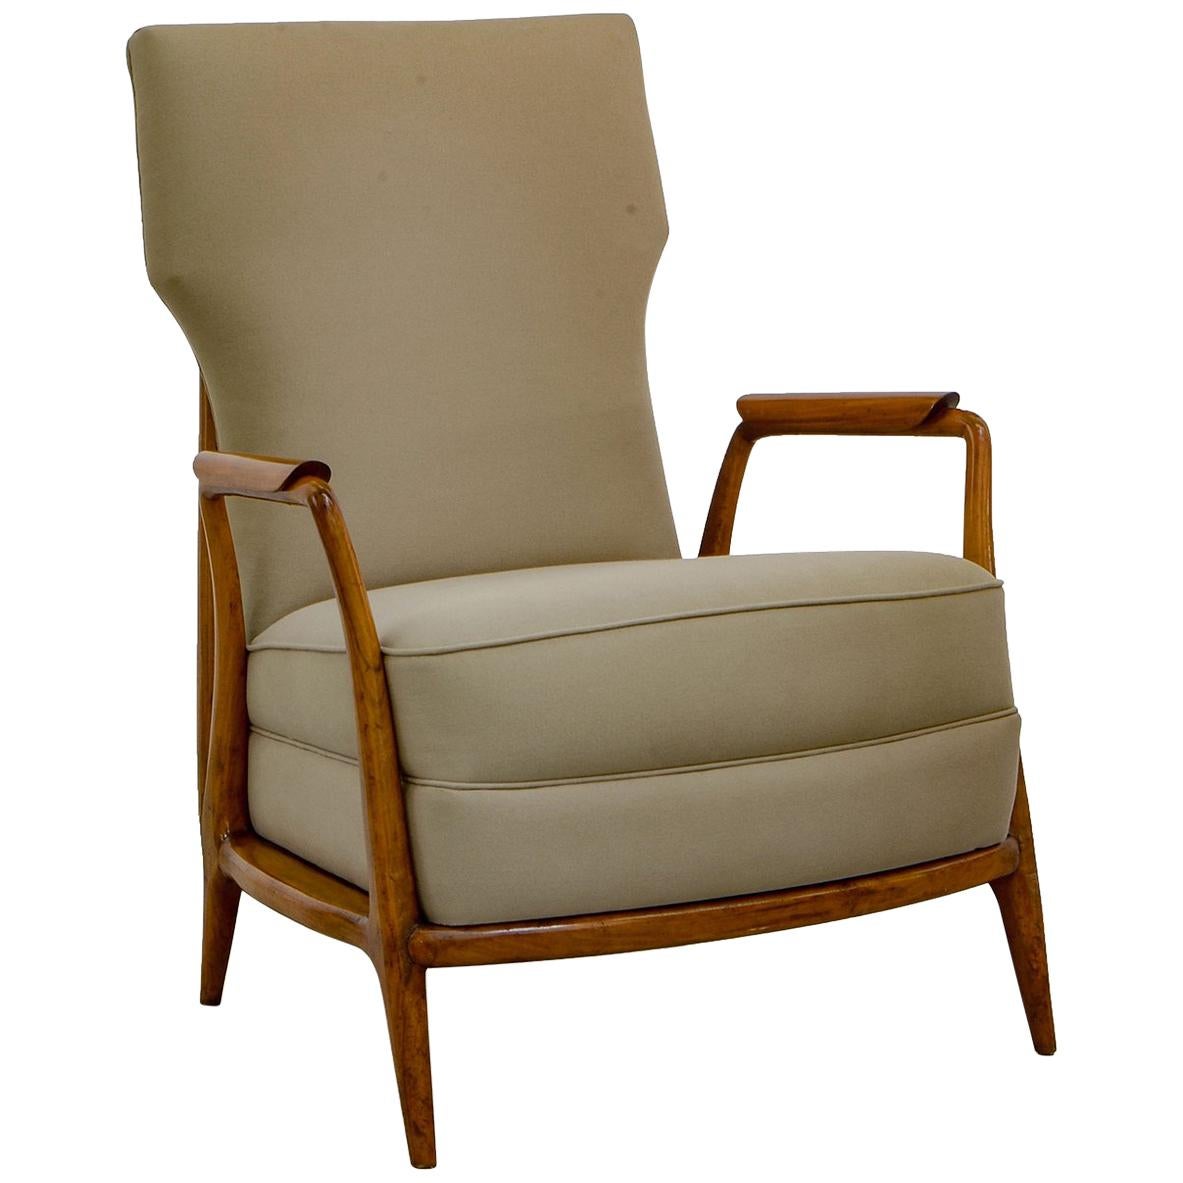 Pair of Armchairs in Tropical Wood, by Giuseppe Scapinelly, Mid-Century Modern